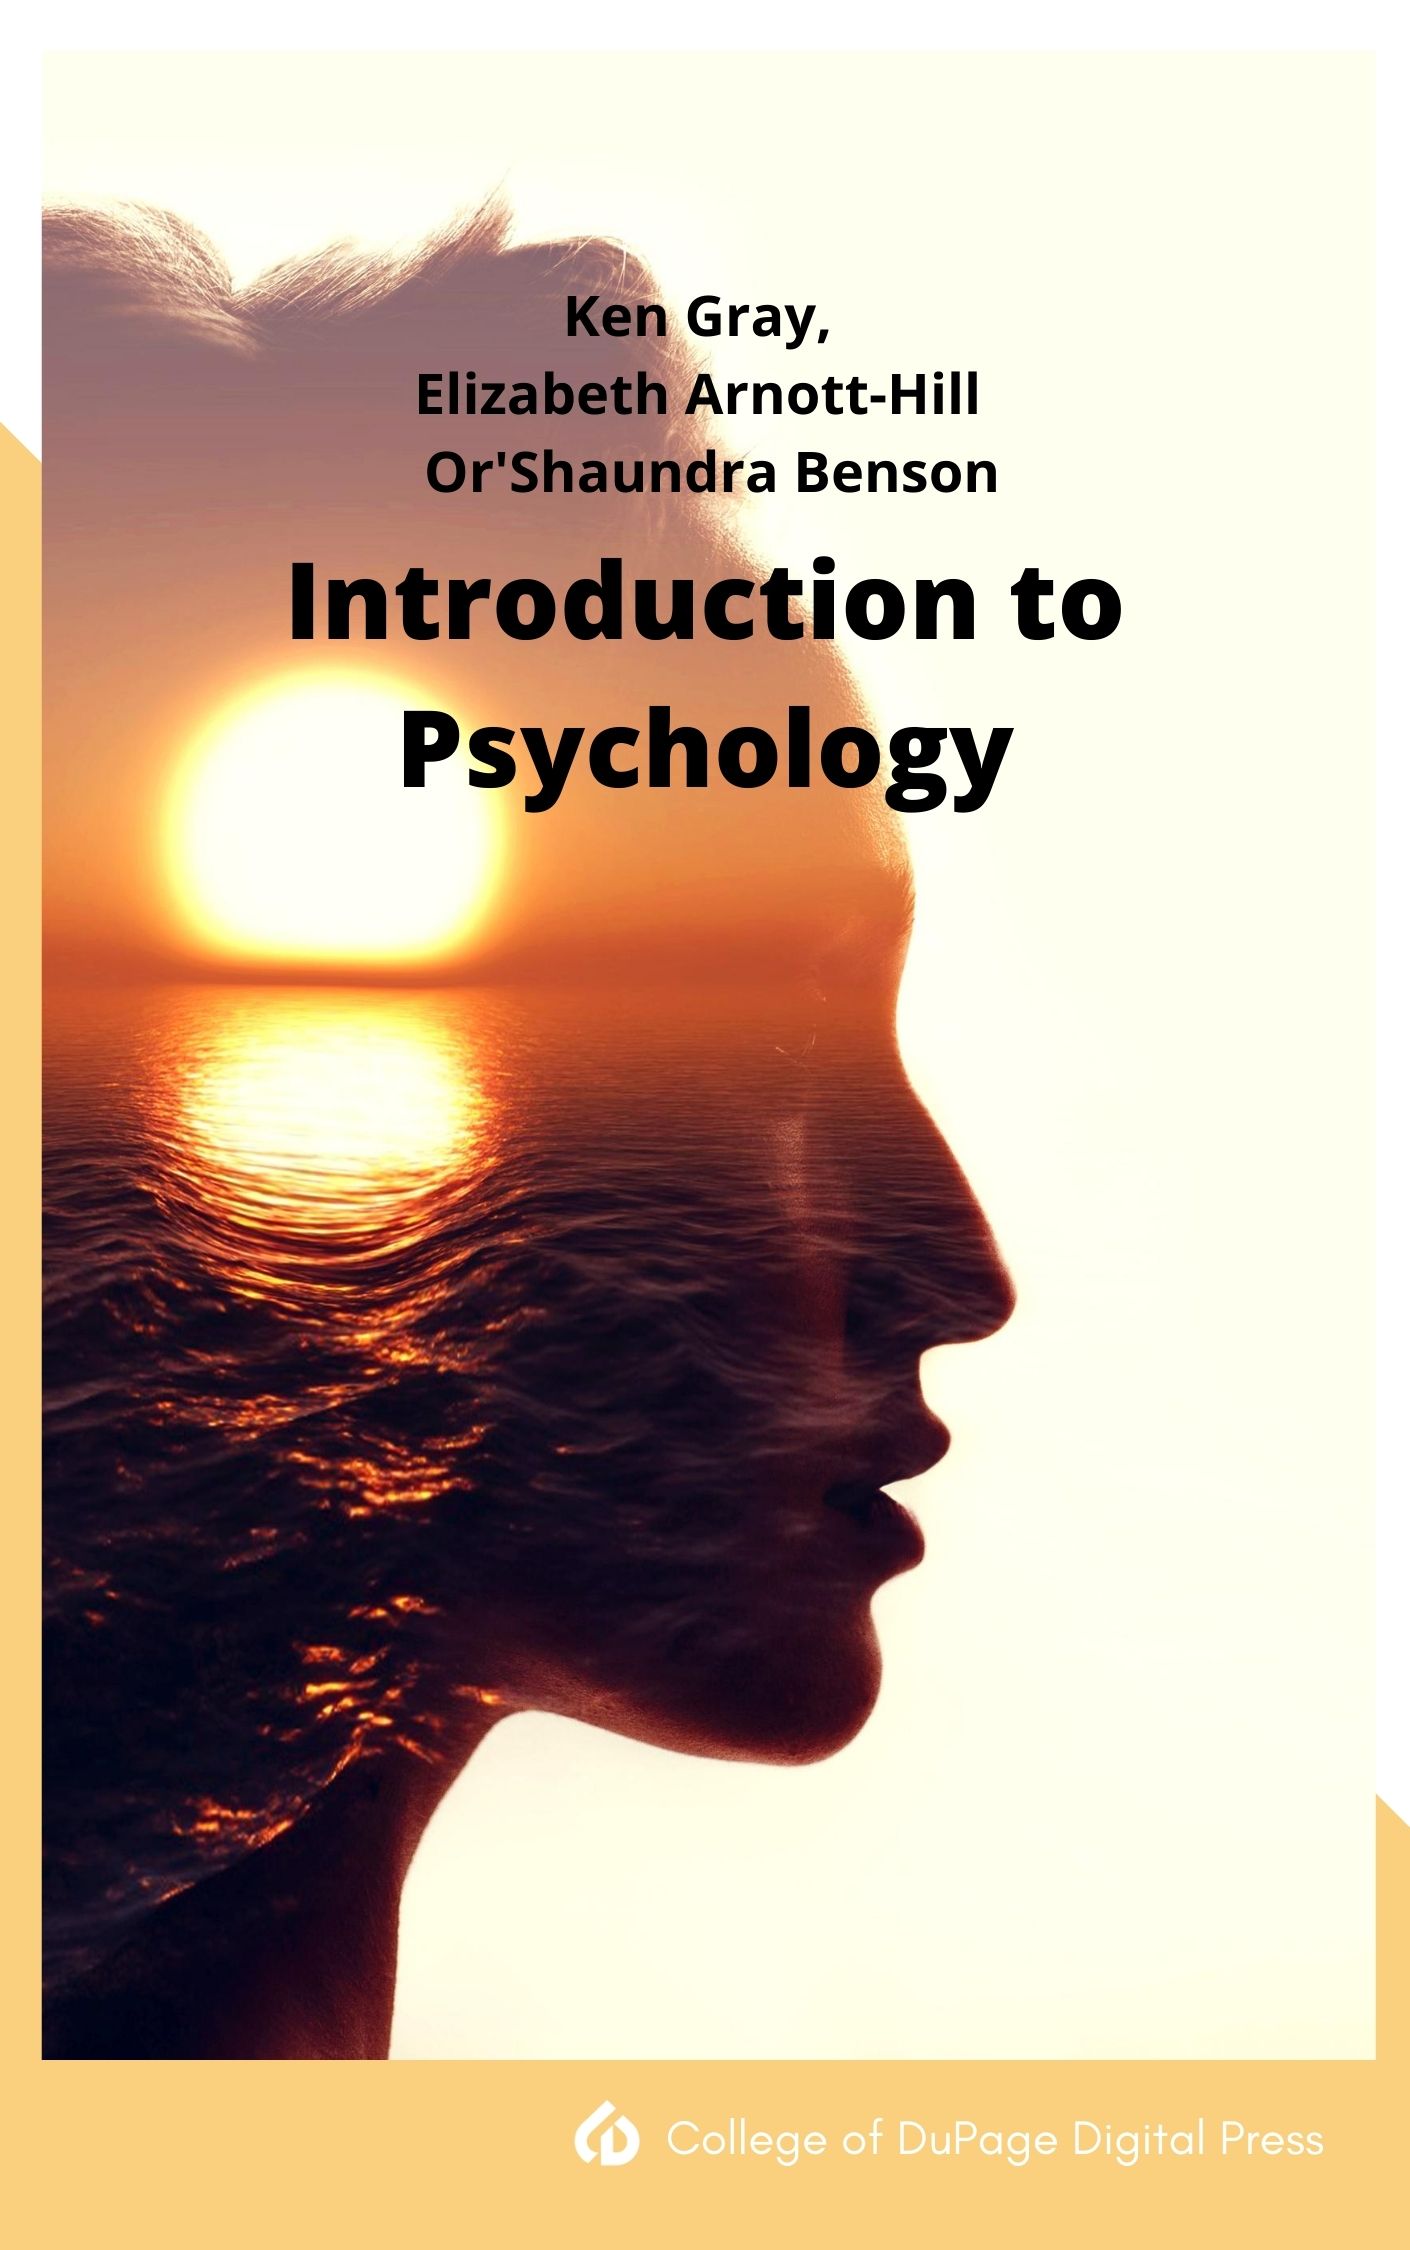 Cover image for Introduction to Psychology, 2nd Edition (June 2021)